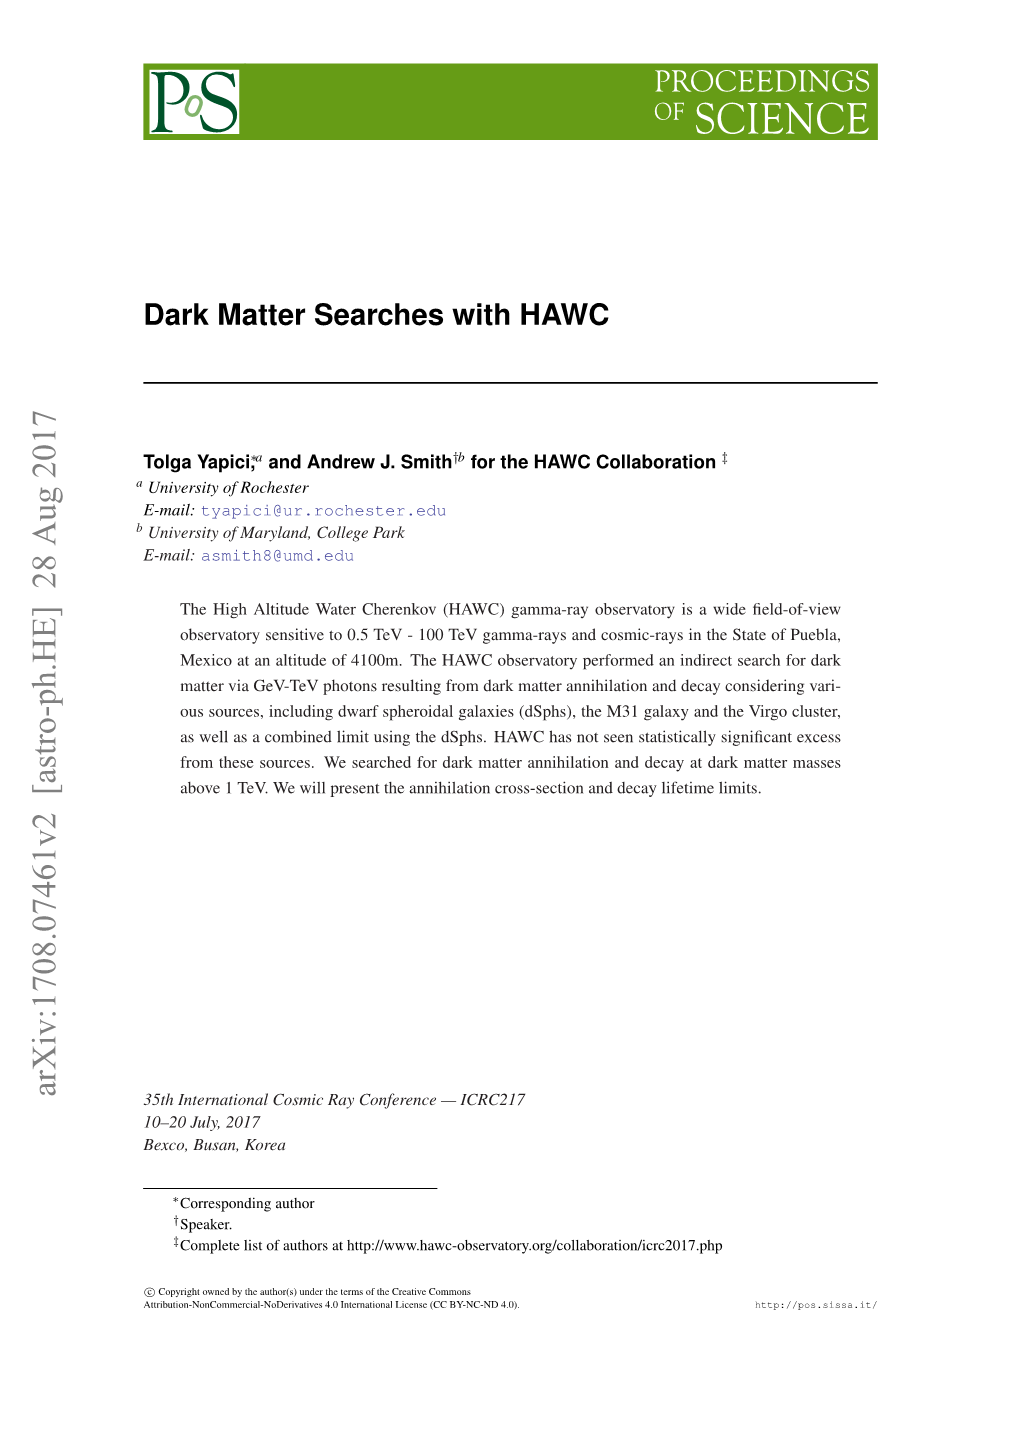 Dark Matter Searches with HAWC